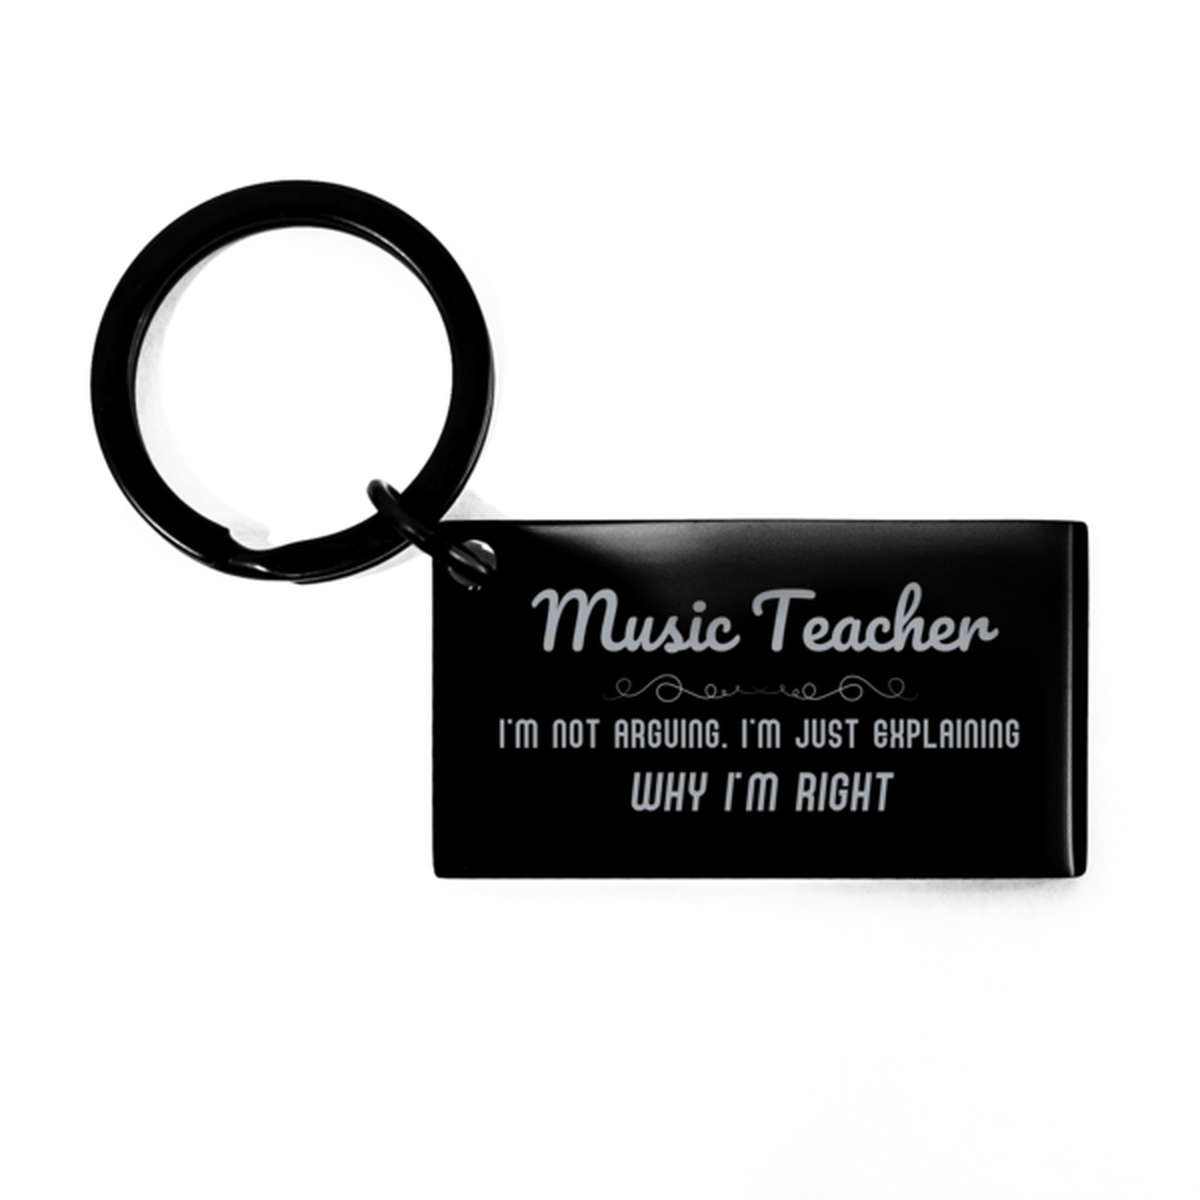 Music Teacher I'm not Arguing. I'm Just Explaining Why I'm RIGHT Keychain, Funny Saying Quote Music Teacher Gifts For Music Teacher Graduation Birthday Christmas Gifts for Men Women Coworker